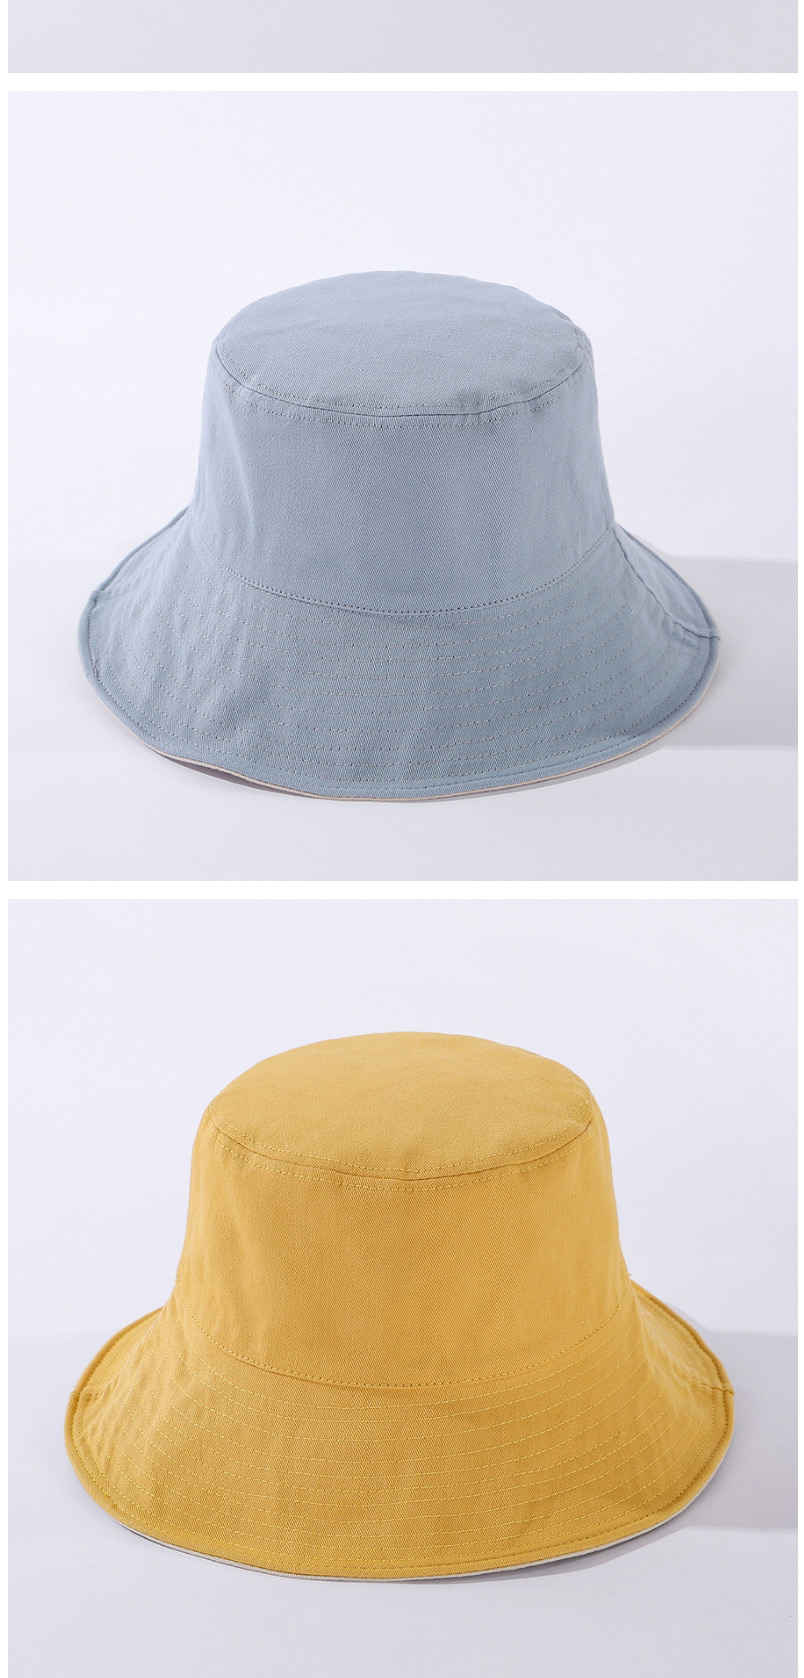 Fashion Khaki Double-sided Solid Color Cotton Sunshade Fisherman Hat,Beanies&Others